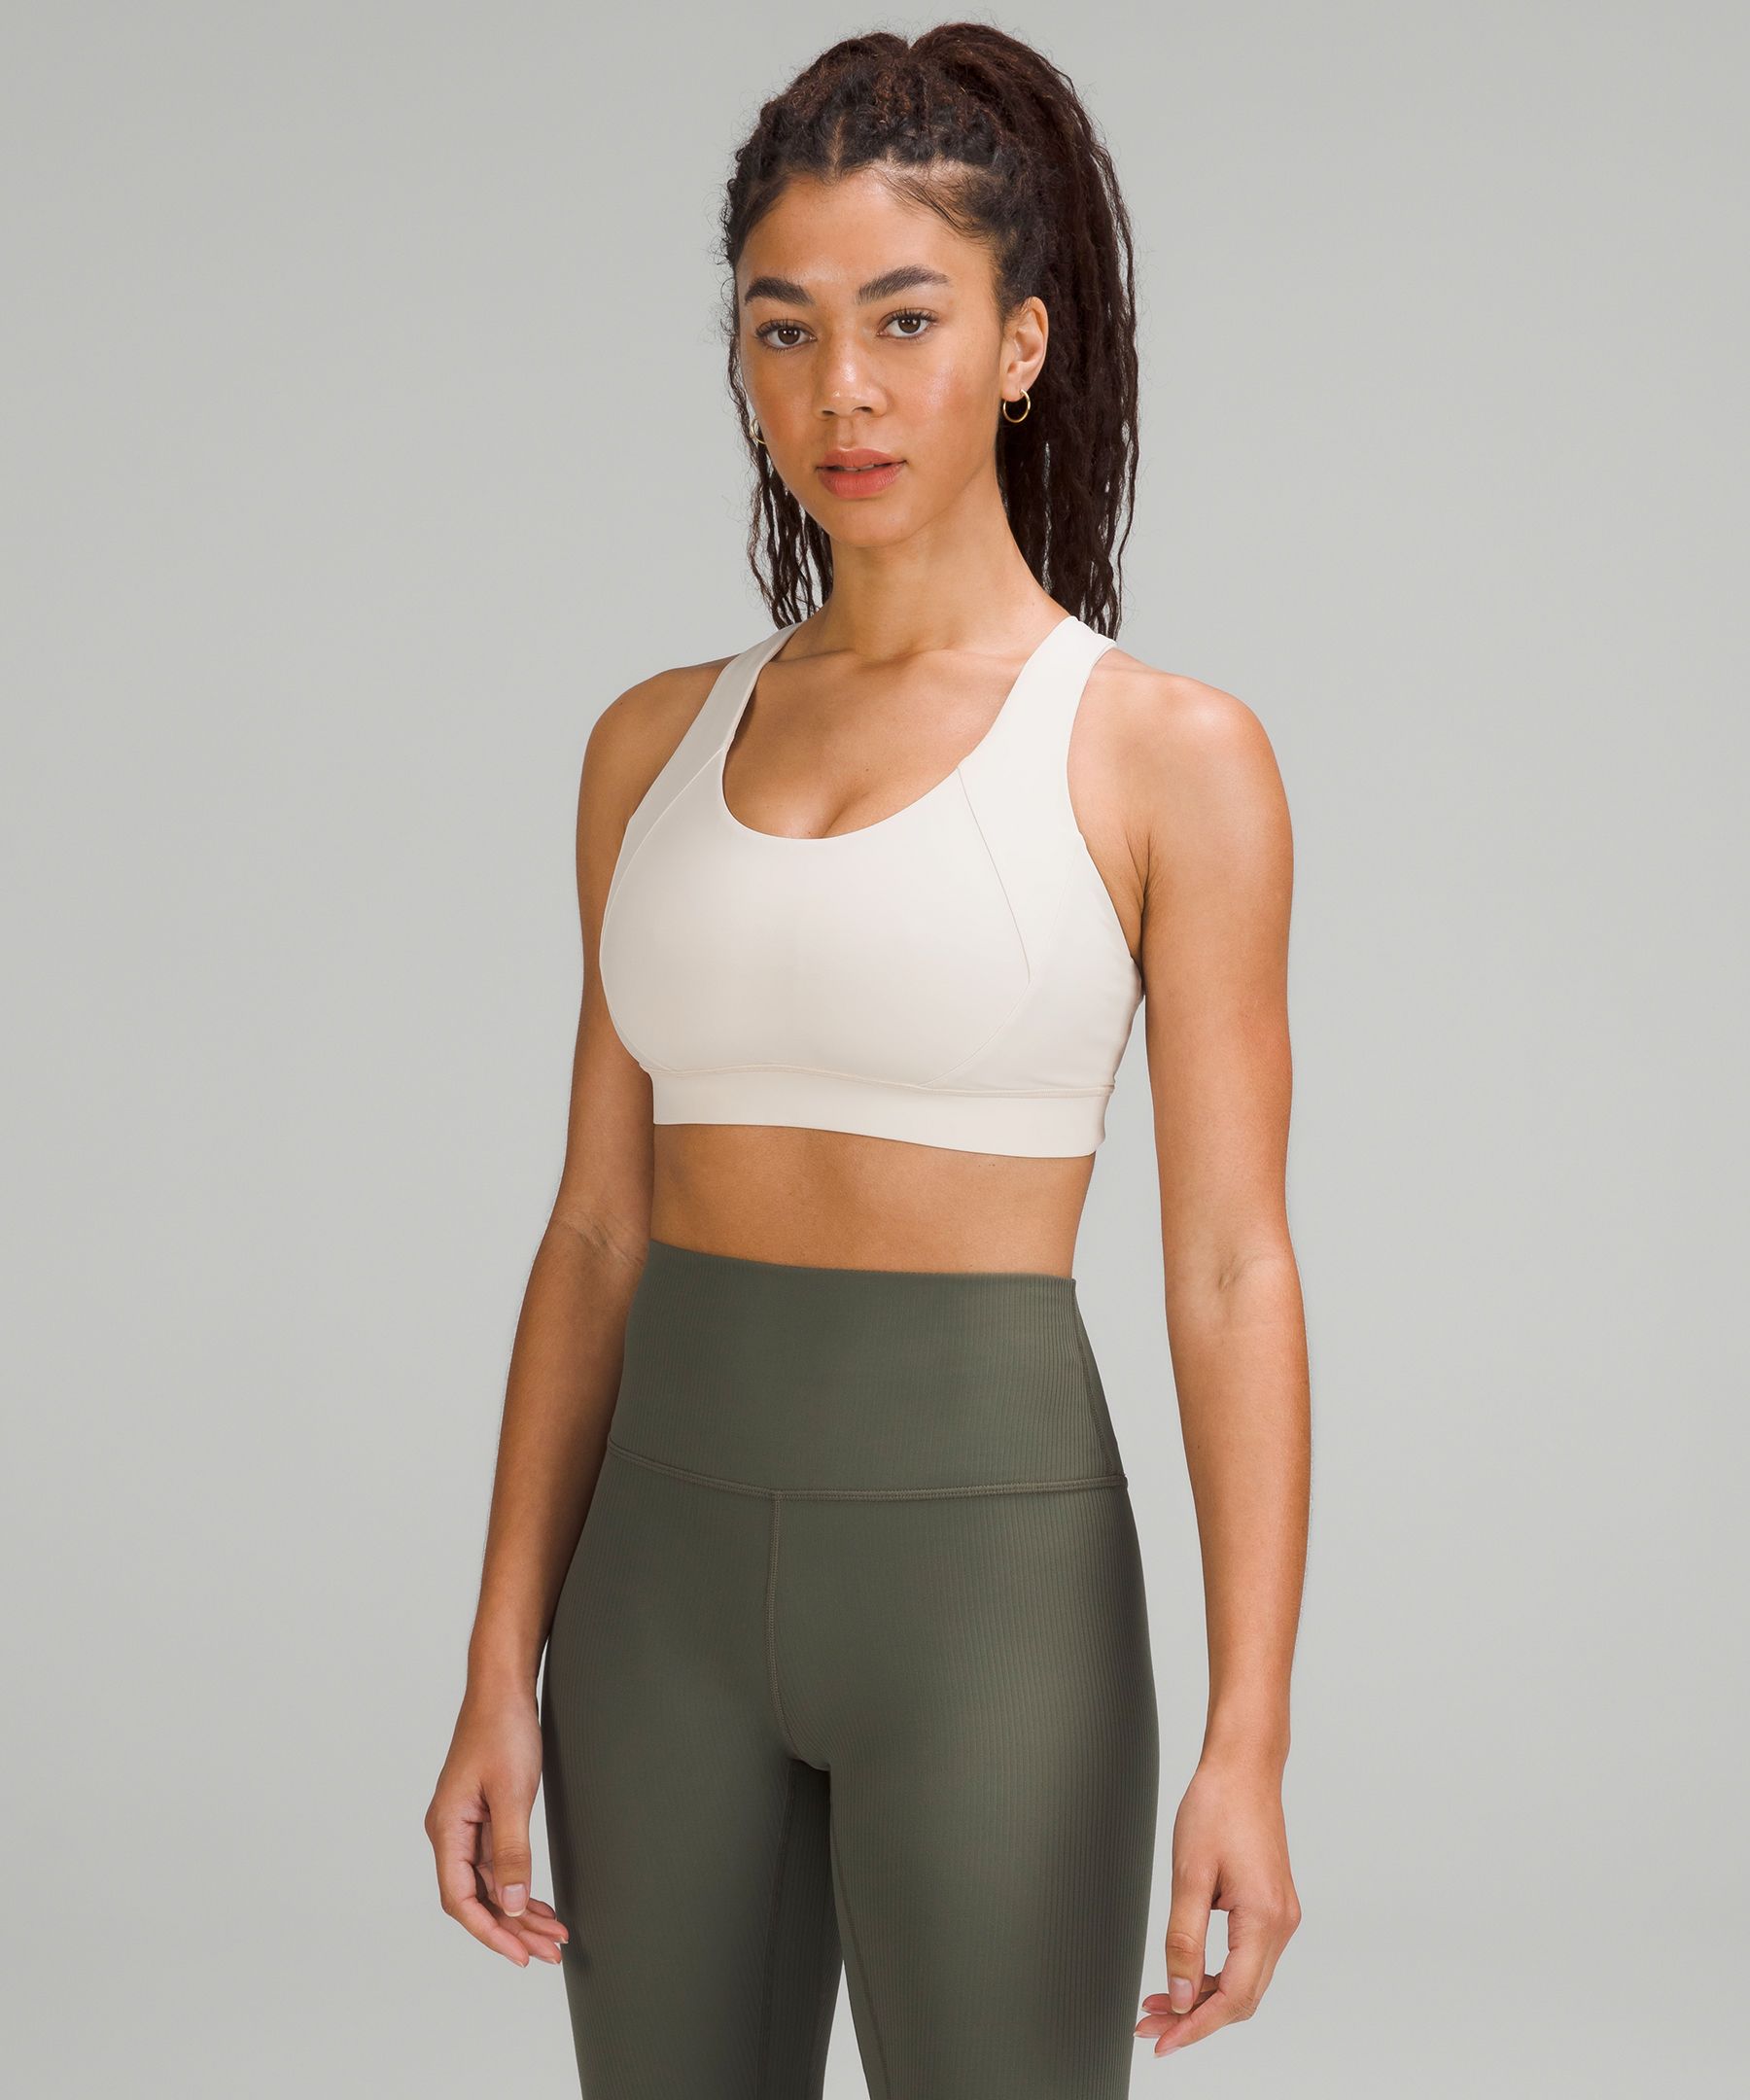 Lululemon Free To Be Elevated Bra Light Support, Dd/ddd(e) Cup In